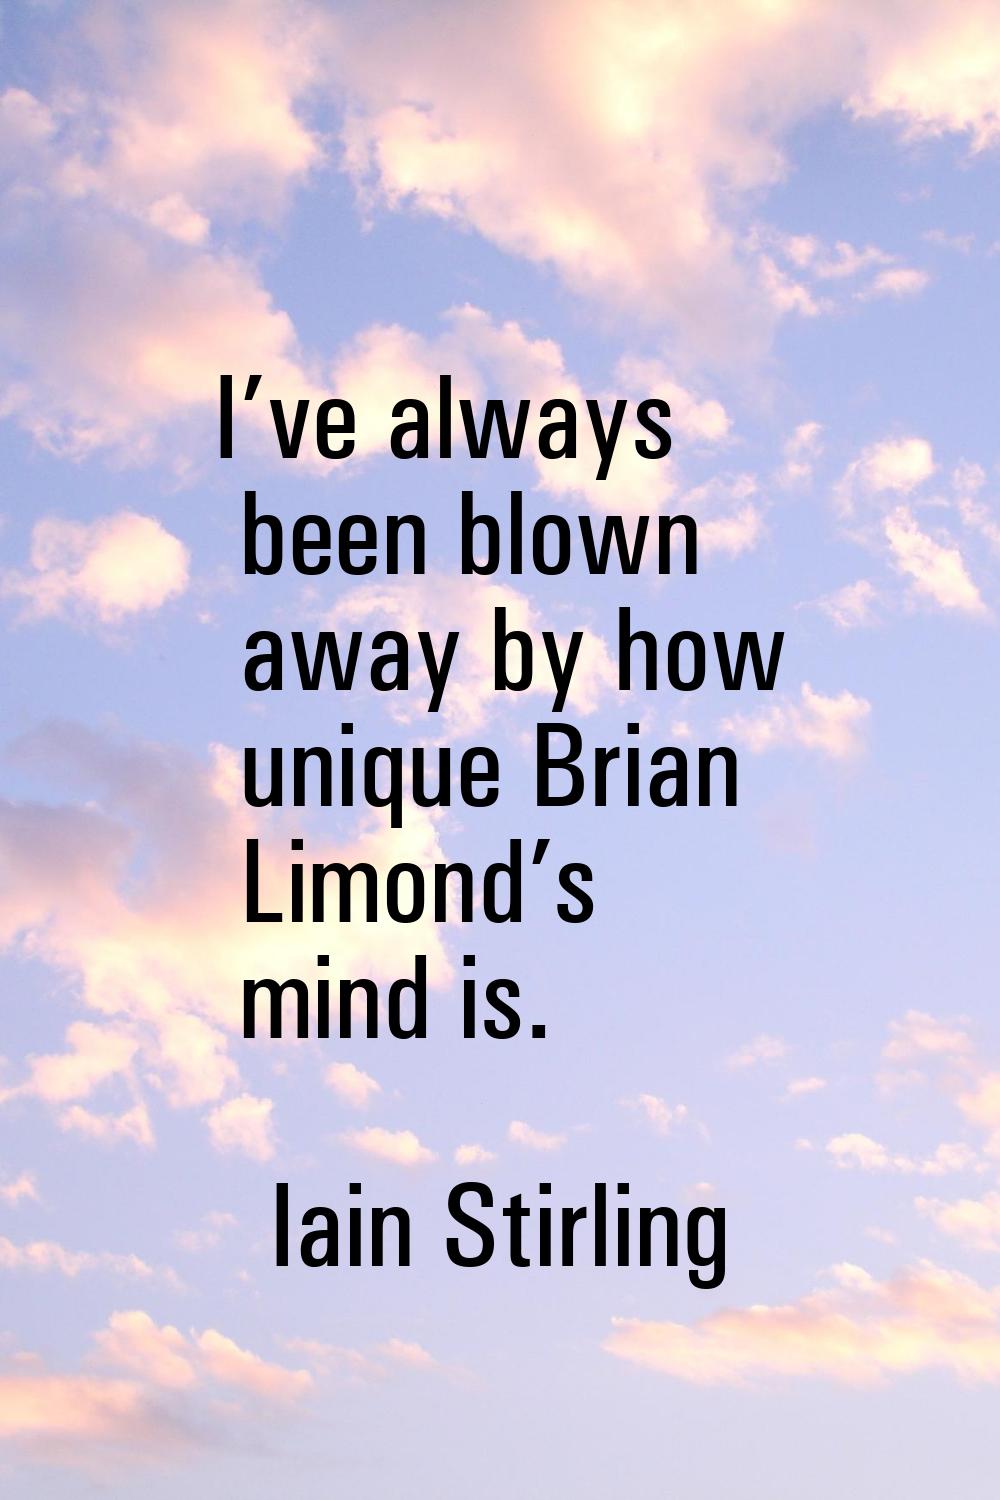 I’ve always been blown away by how unique Brian Limond’s mind is.